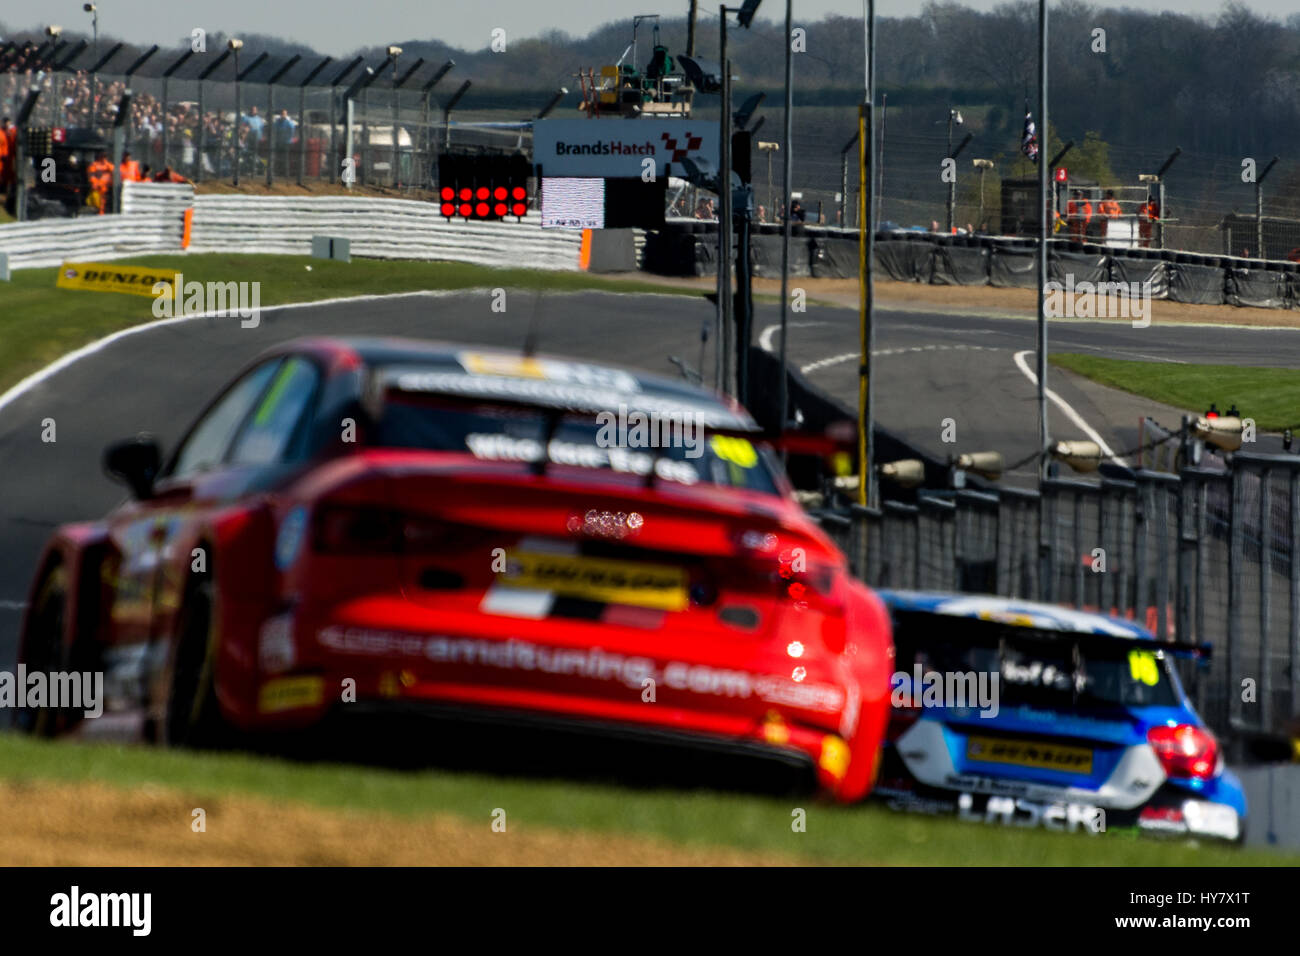 Fawkham, Longfield, UK. 2nd April, 2017. BTCC racing driver Ant Whorton-Eales and AmDtuning.com with Cobra Exhausts drives during Round 1 of the Dunlop MSA British Touring Car Championship at Brands Hatch Indy Circuit (Photo by Gergo Toth / Alamy Live News) Stock Photo